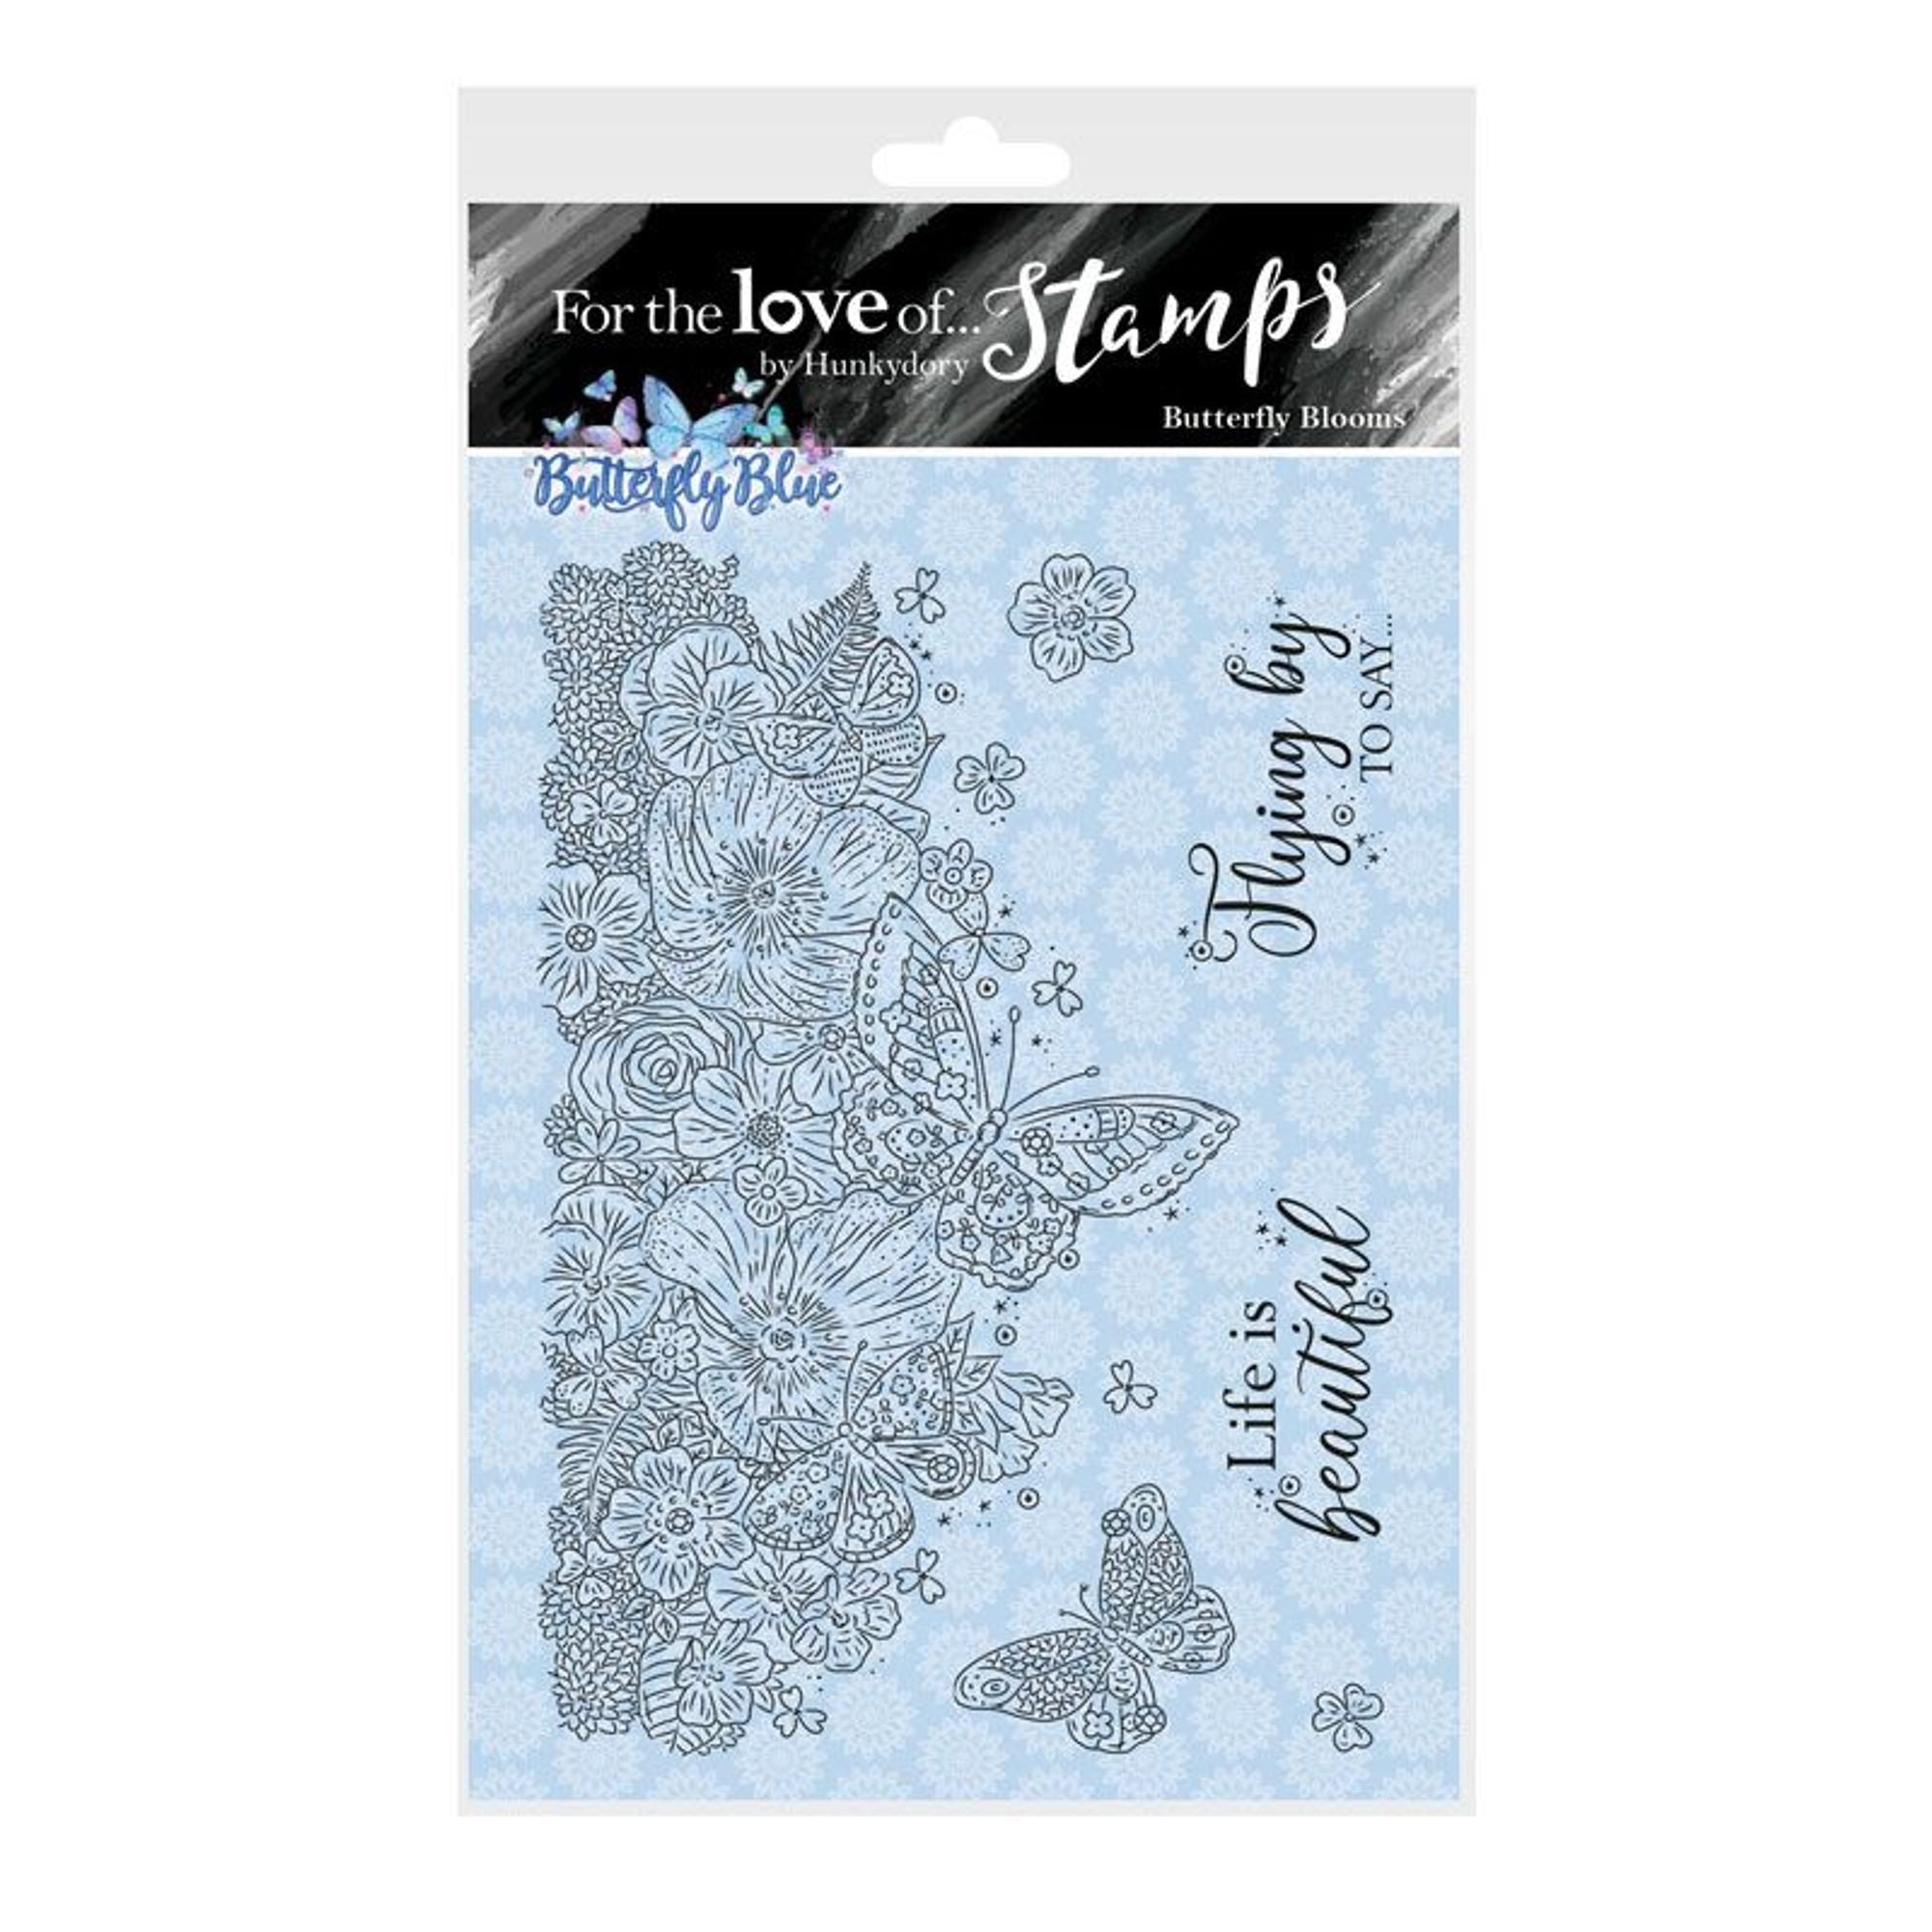 For the Love of Stamps - Butterfly Blooms